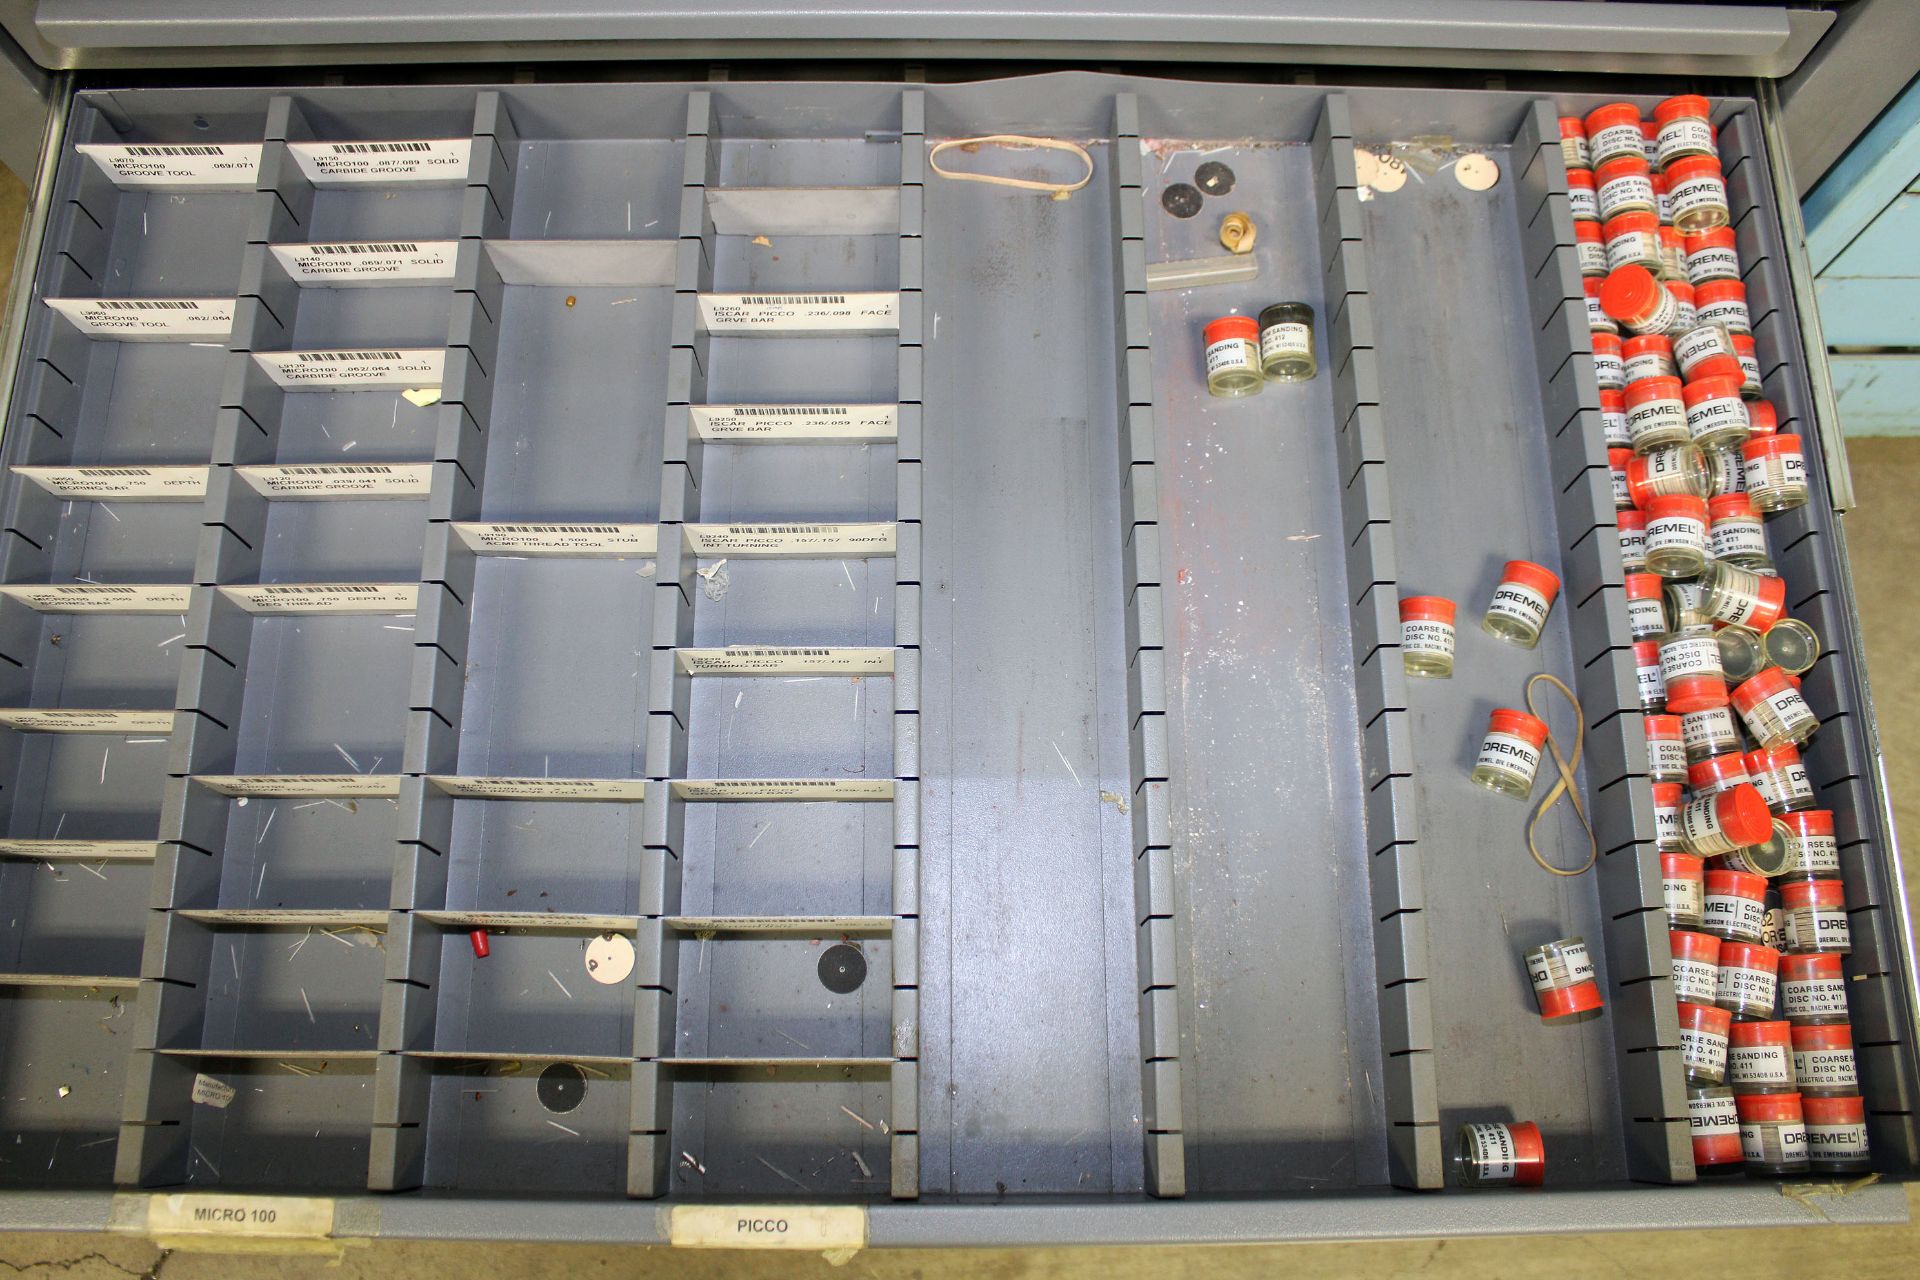 CABINET, HUOT, 15 DRAWER, 19" X 34" X 37" HEIGHT, WITH CONTENTS, CENTER DRILLS , JACOBES CHUCK KEYS, - Image 8 of 12